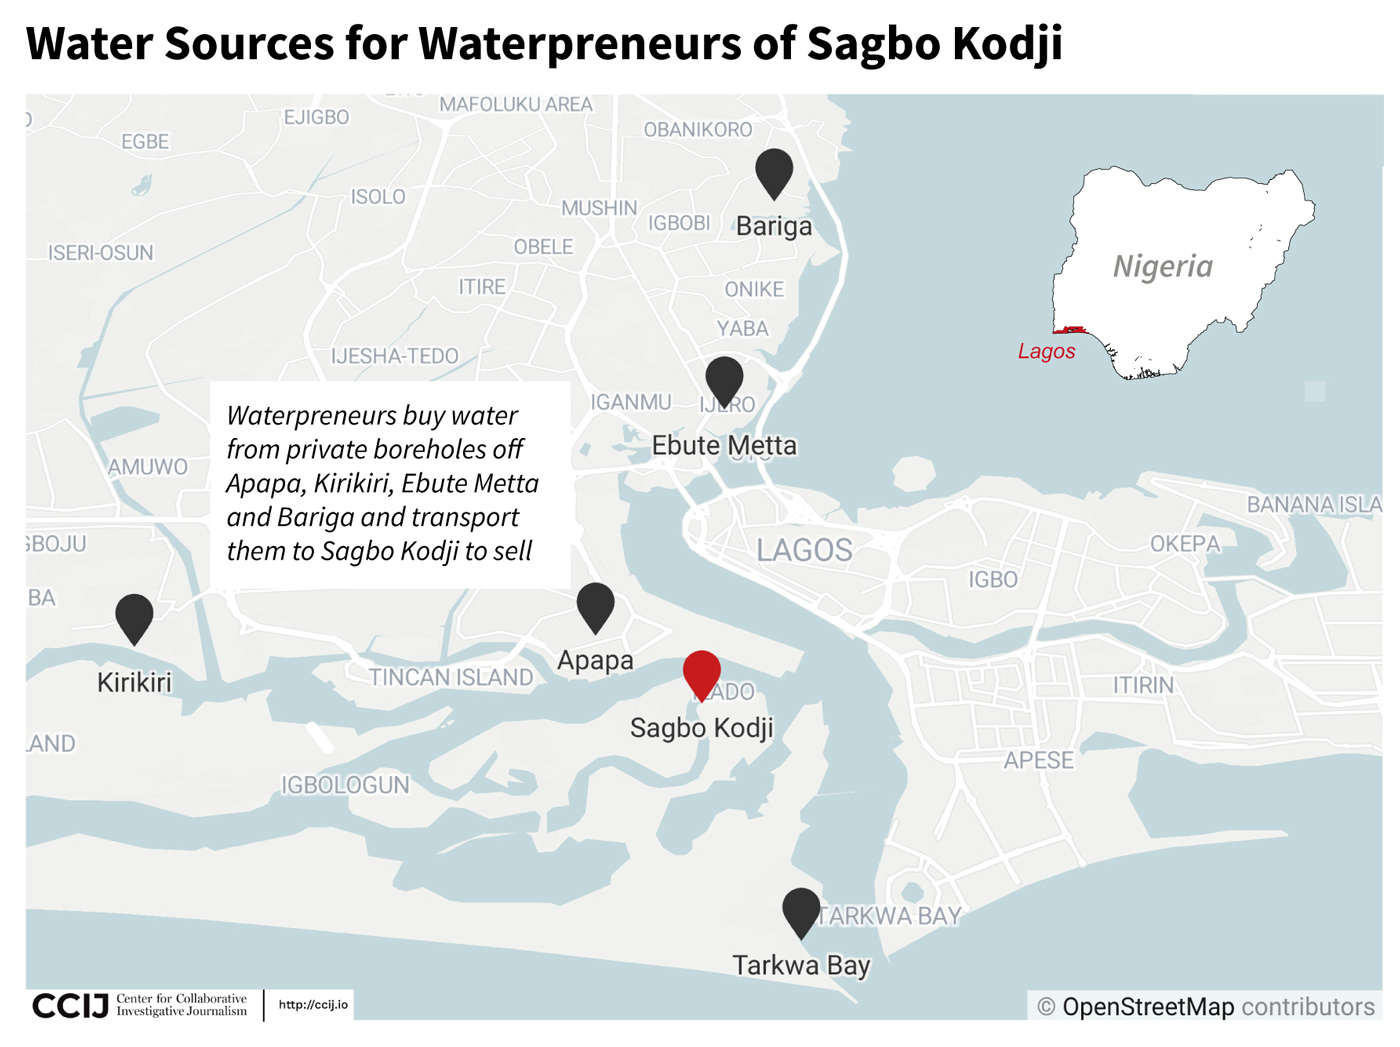 Map showing the locations of water sources for waterpreneures of Sagbo Kodji